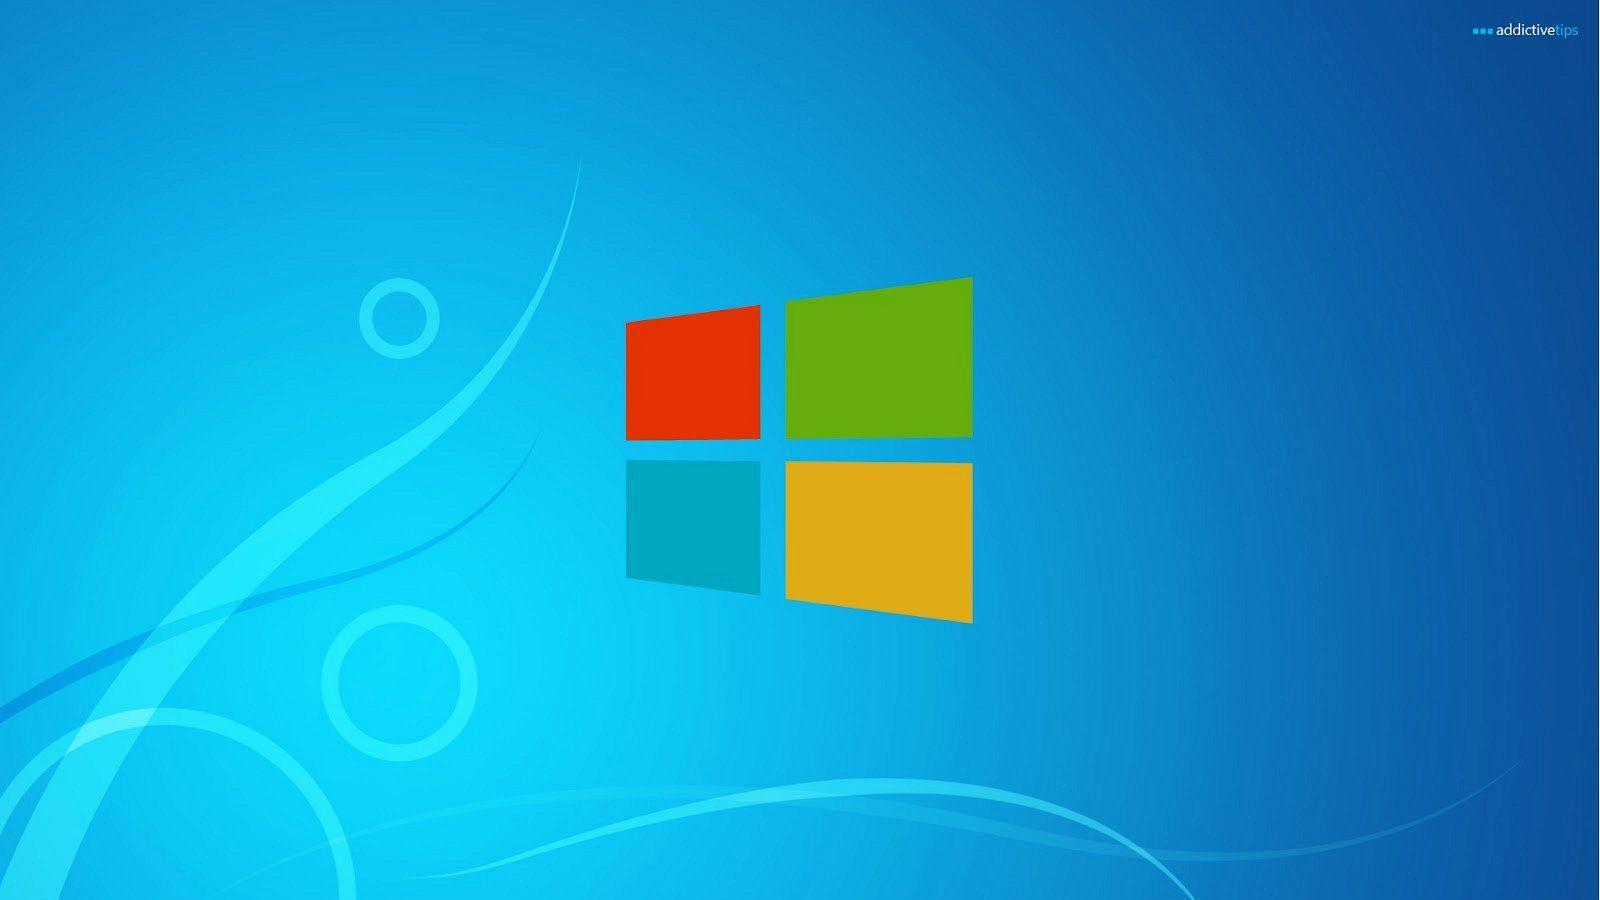 Elegant Windows 8 Wallpaper For Android 66 For Your windows lock